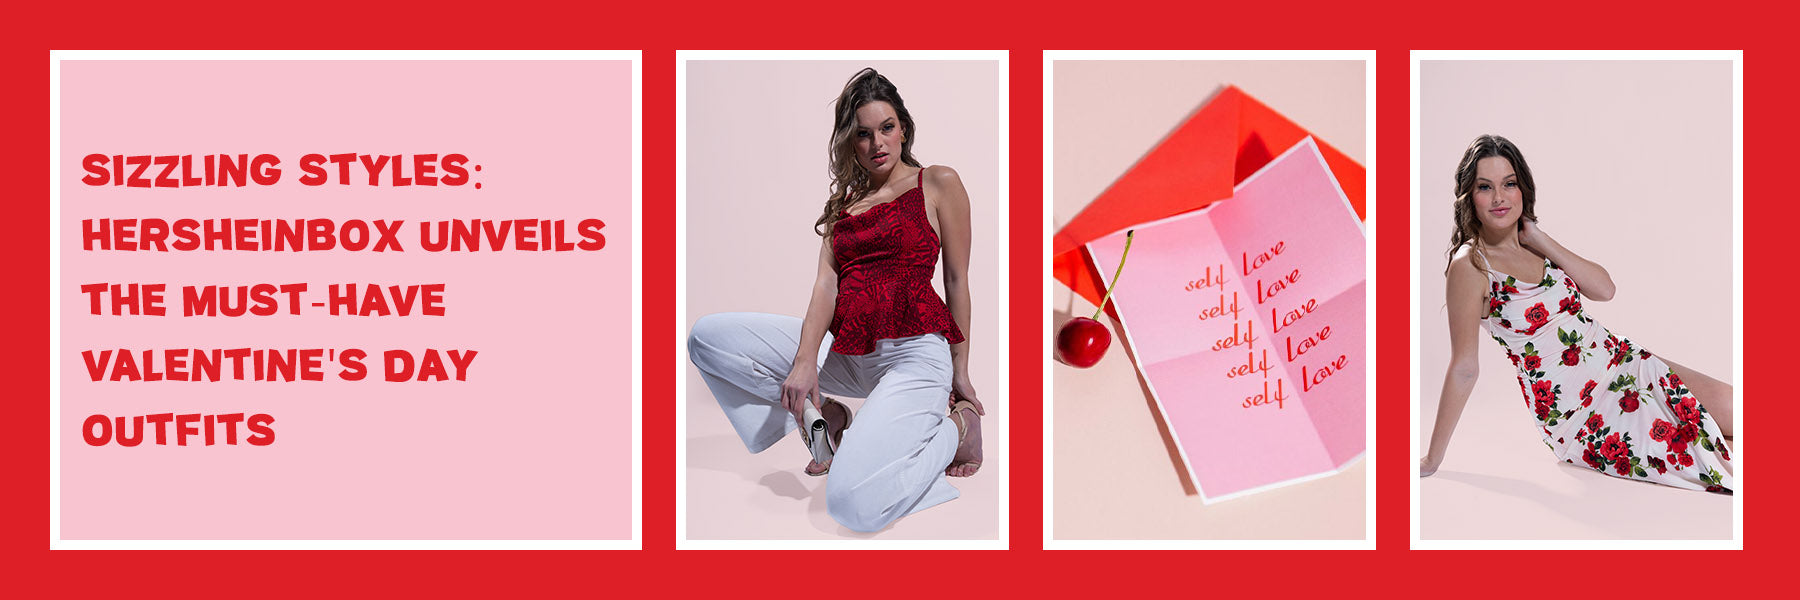 Sizzling Styles: Hersheinbox Unveils the Must-Have Valentine's Day Outfits